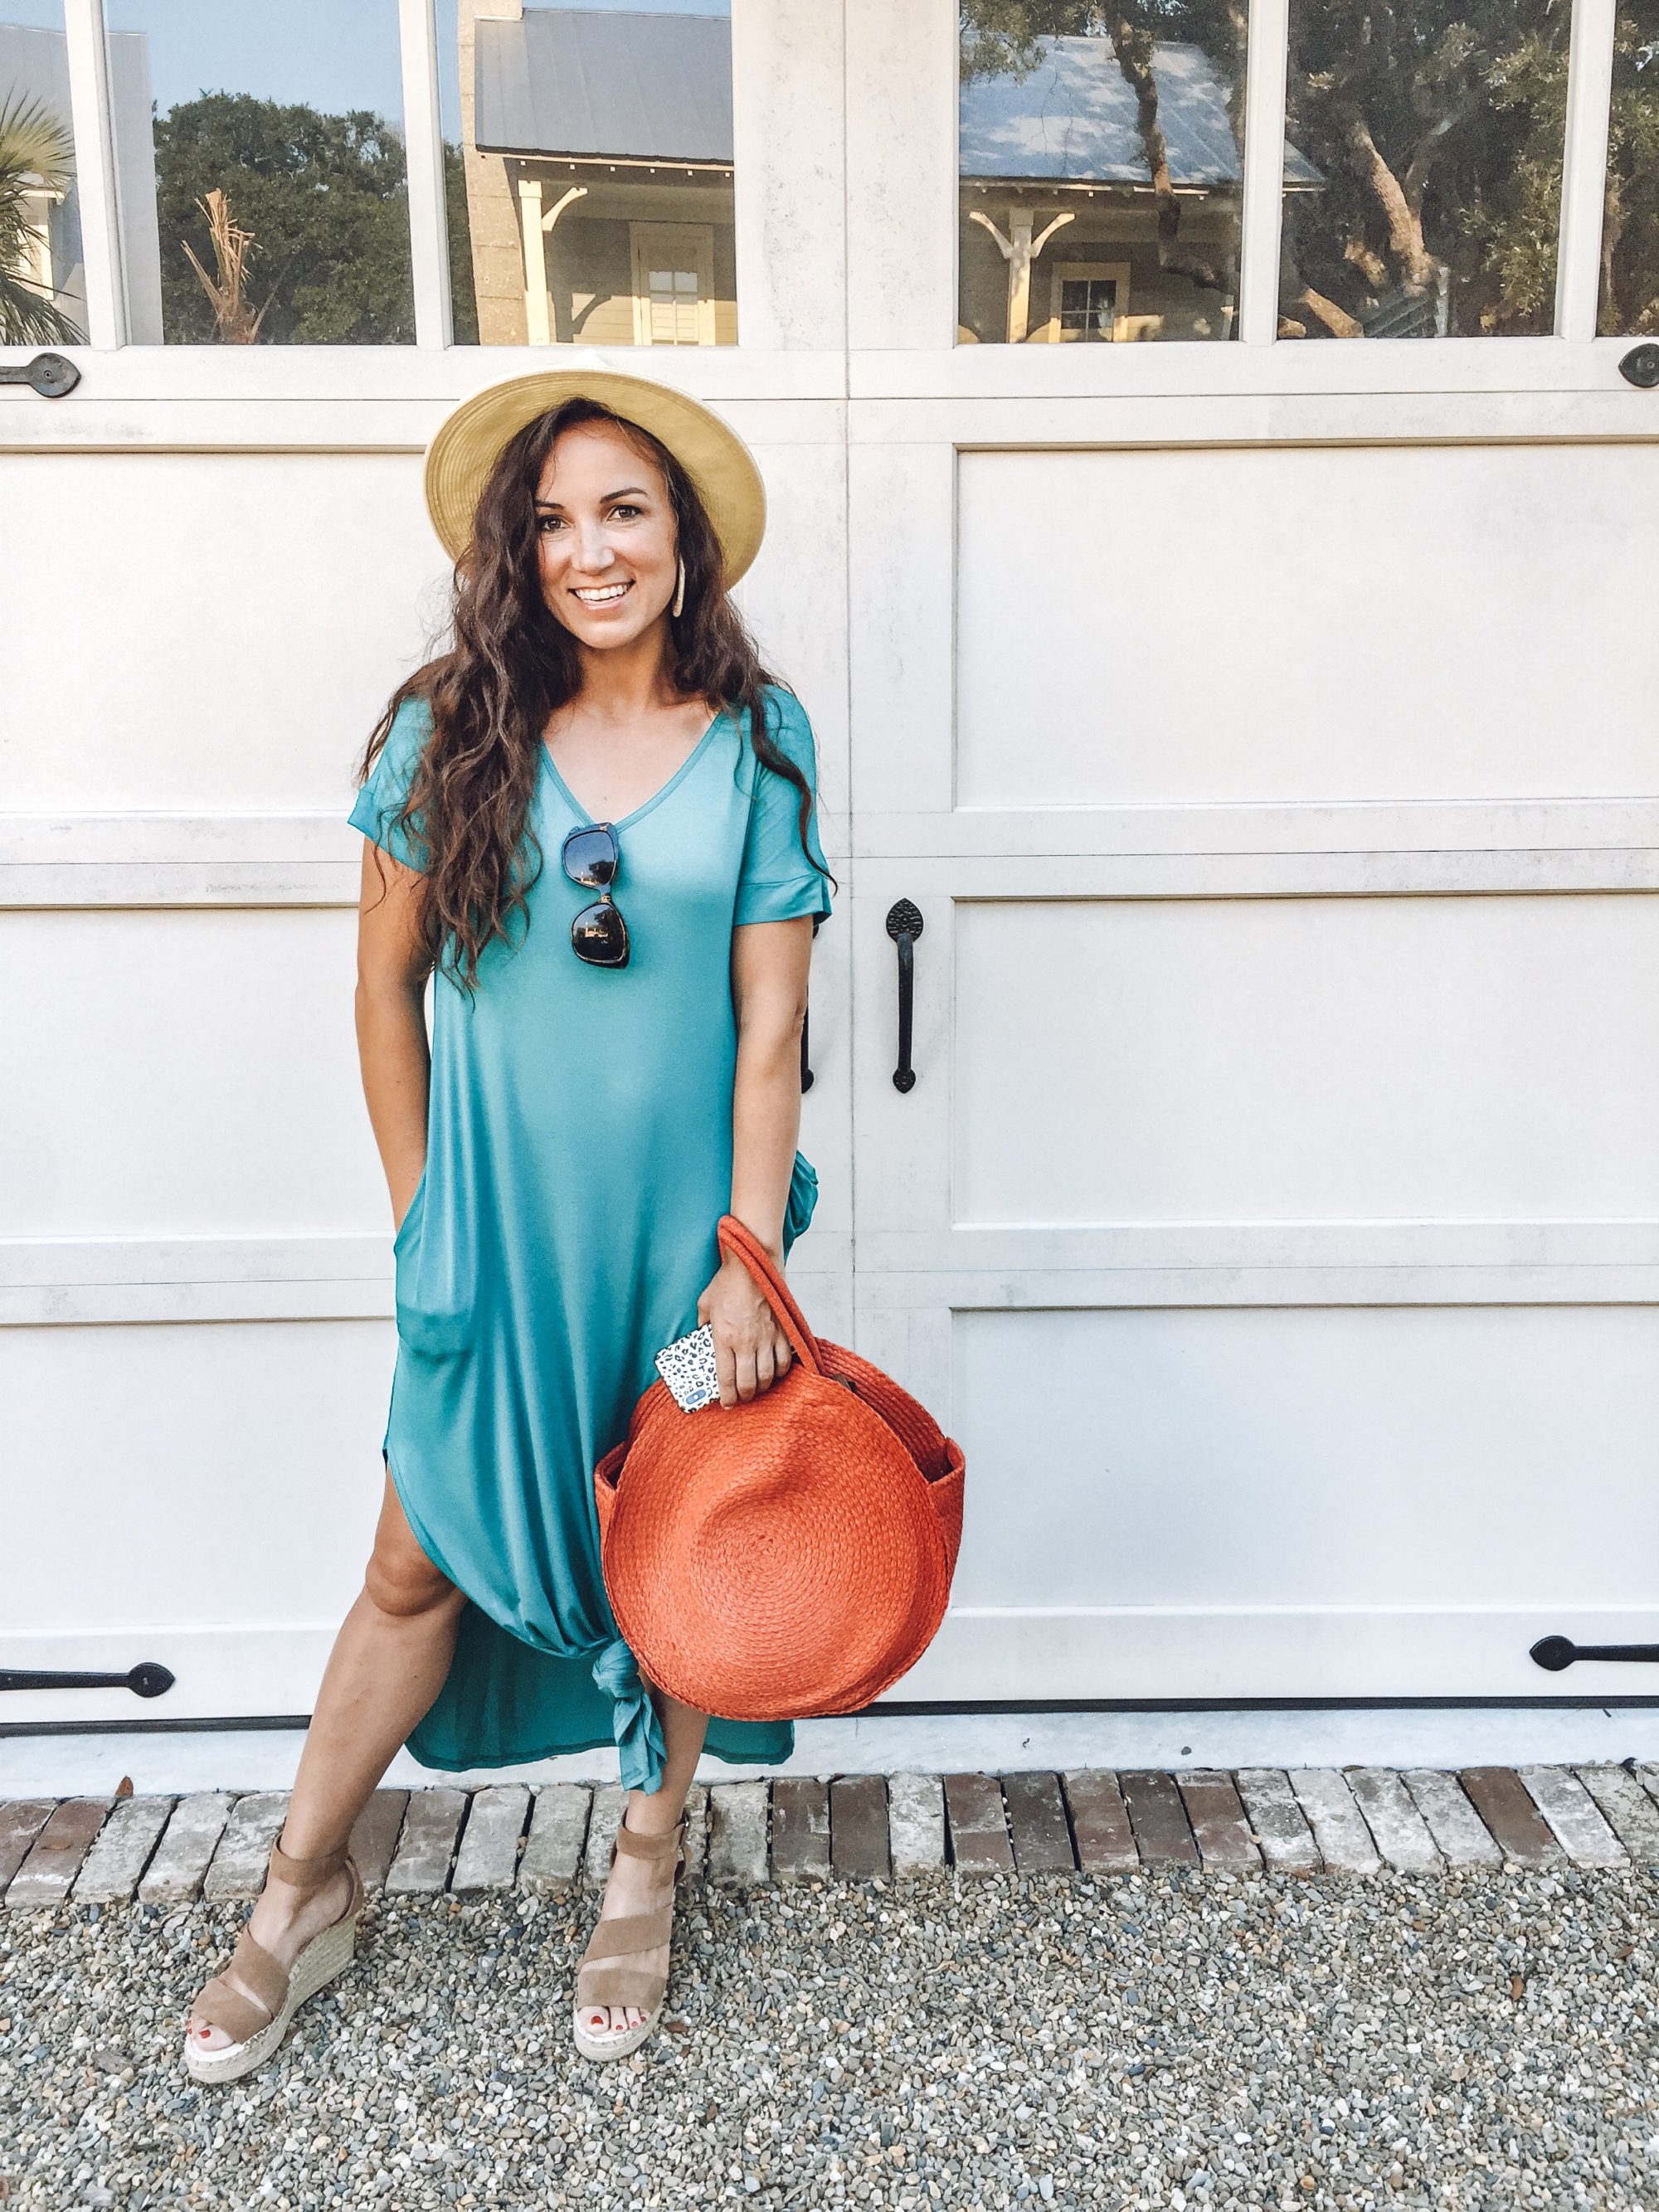 One Minute Outfit, T-Shirt Dress